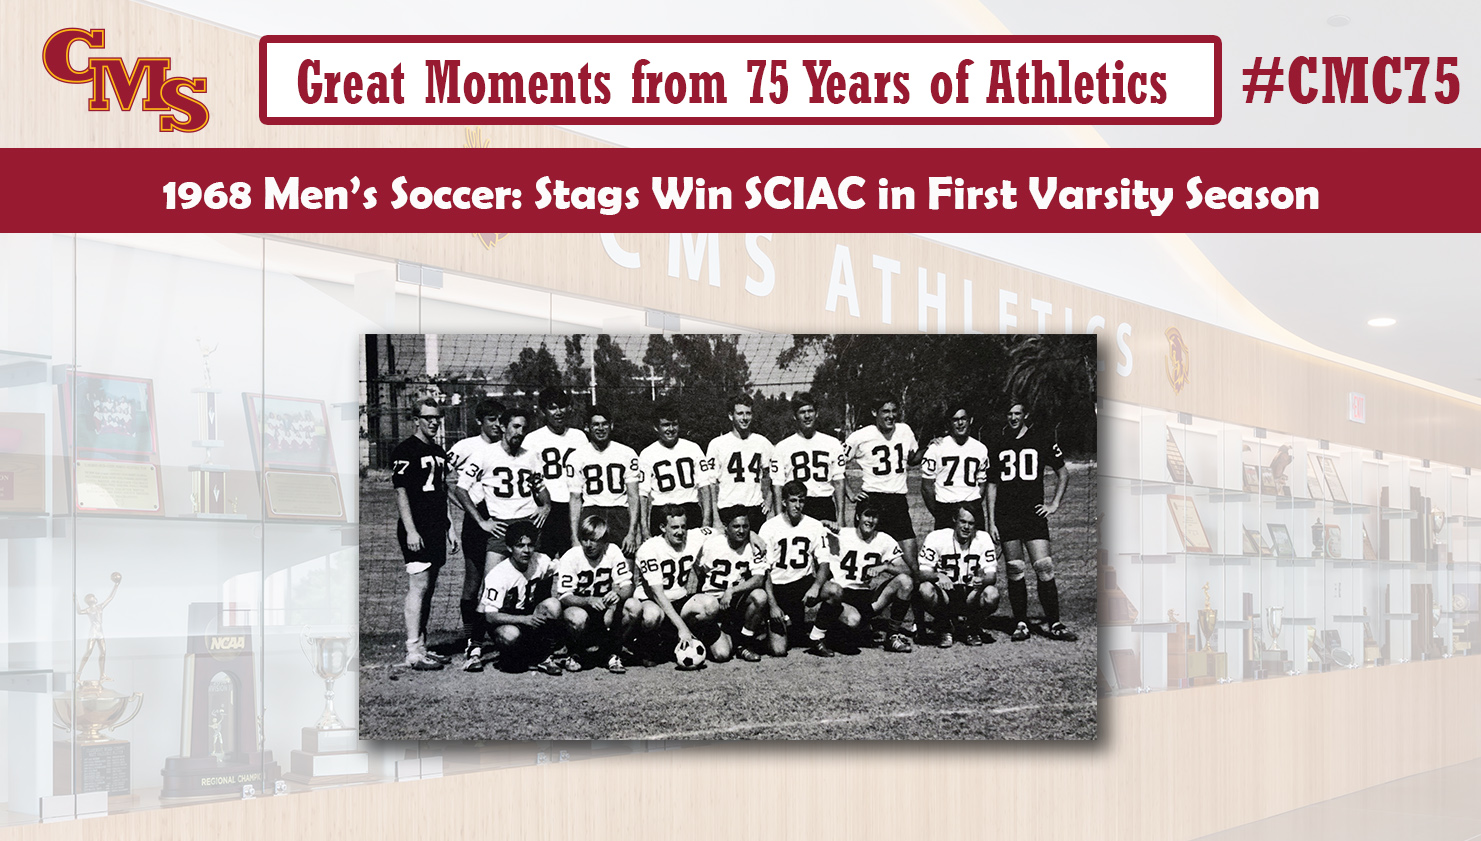 A team photo from the 1968 men's soccer team. Words over the photo read, Great Moments from 75 Years of Athletics: 1968 Men's Soccer: Stags win SCIAC in first varsity season